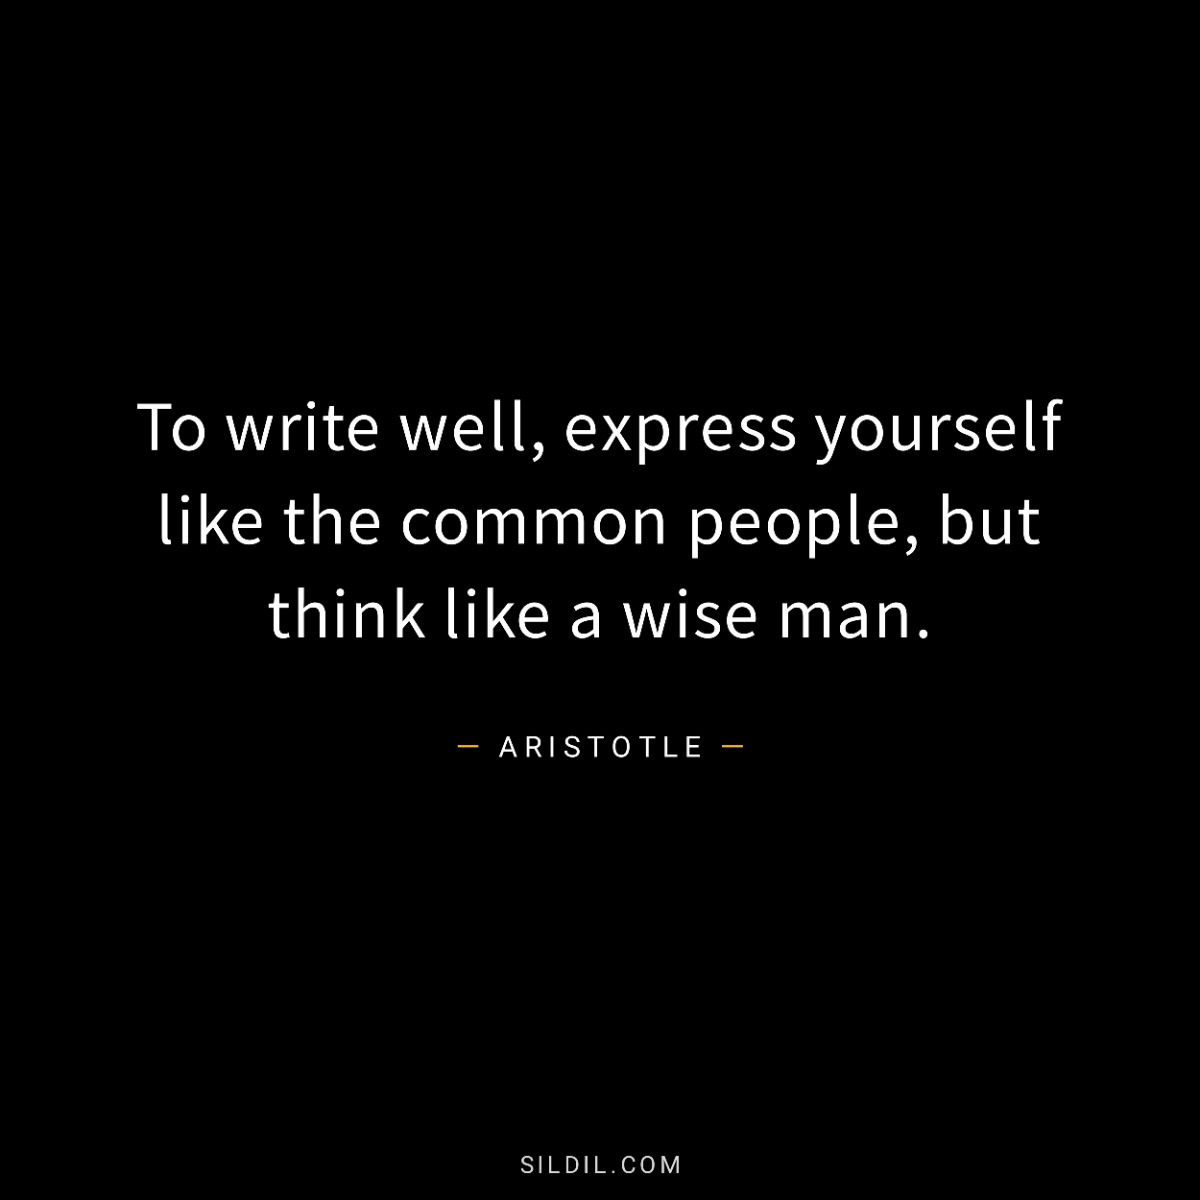 To write well, express yourself like the common people, but think like a wise man.